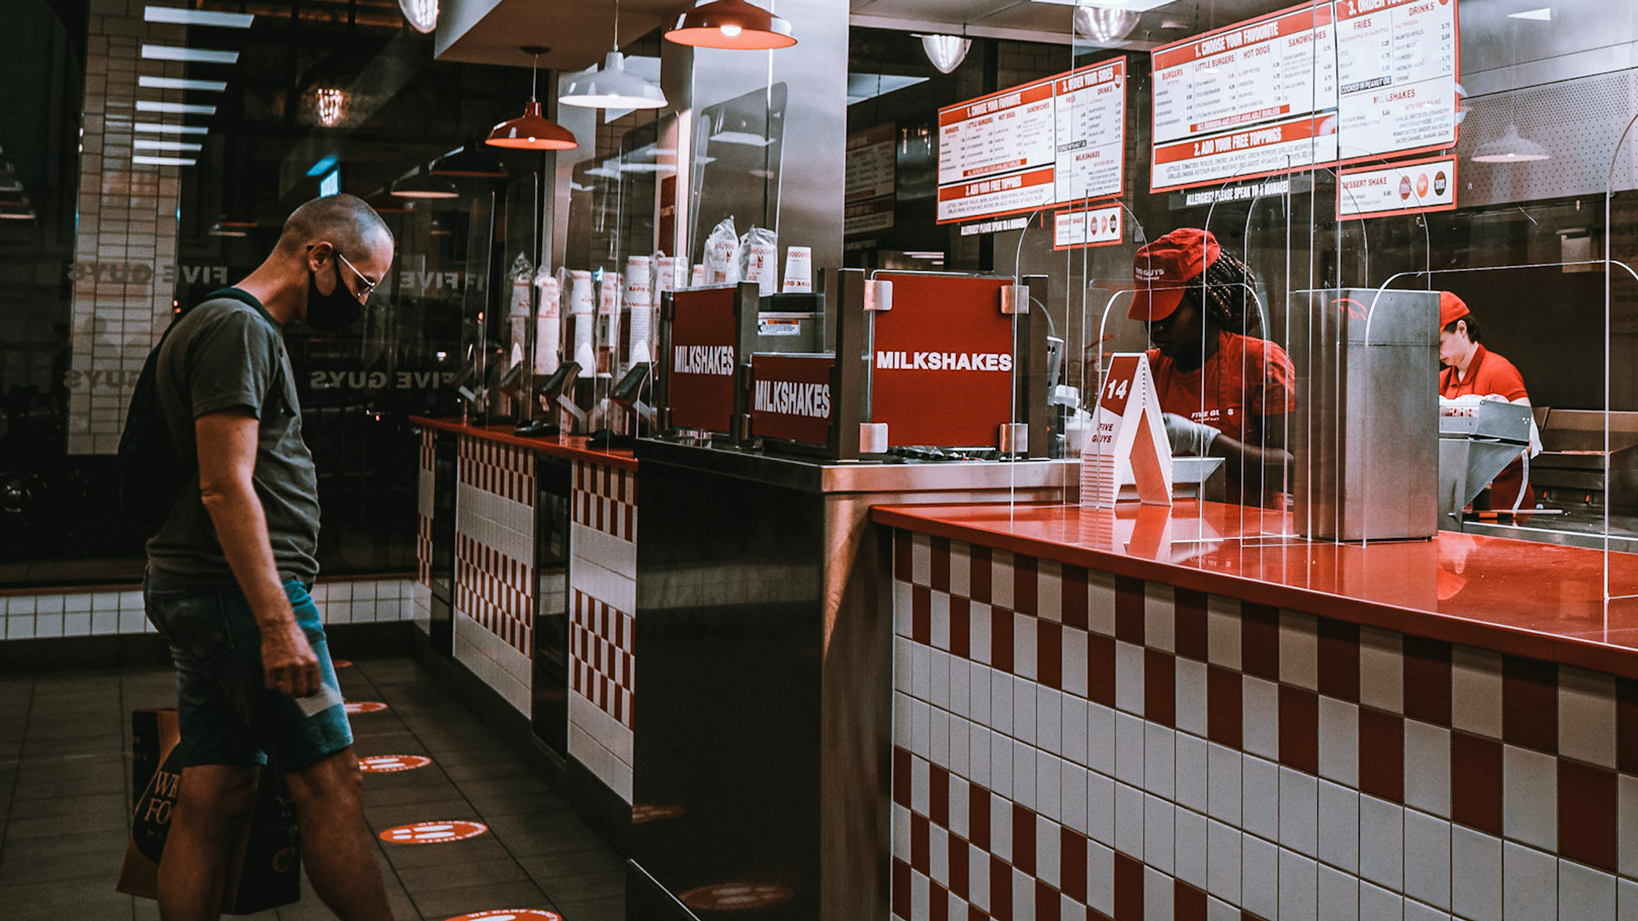 inside the fast-casual restaurant five guys where guy waits to pick up mobile order